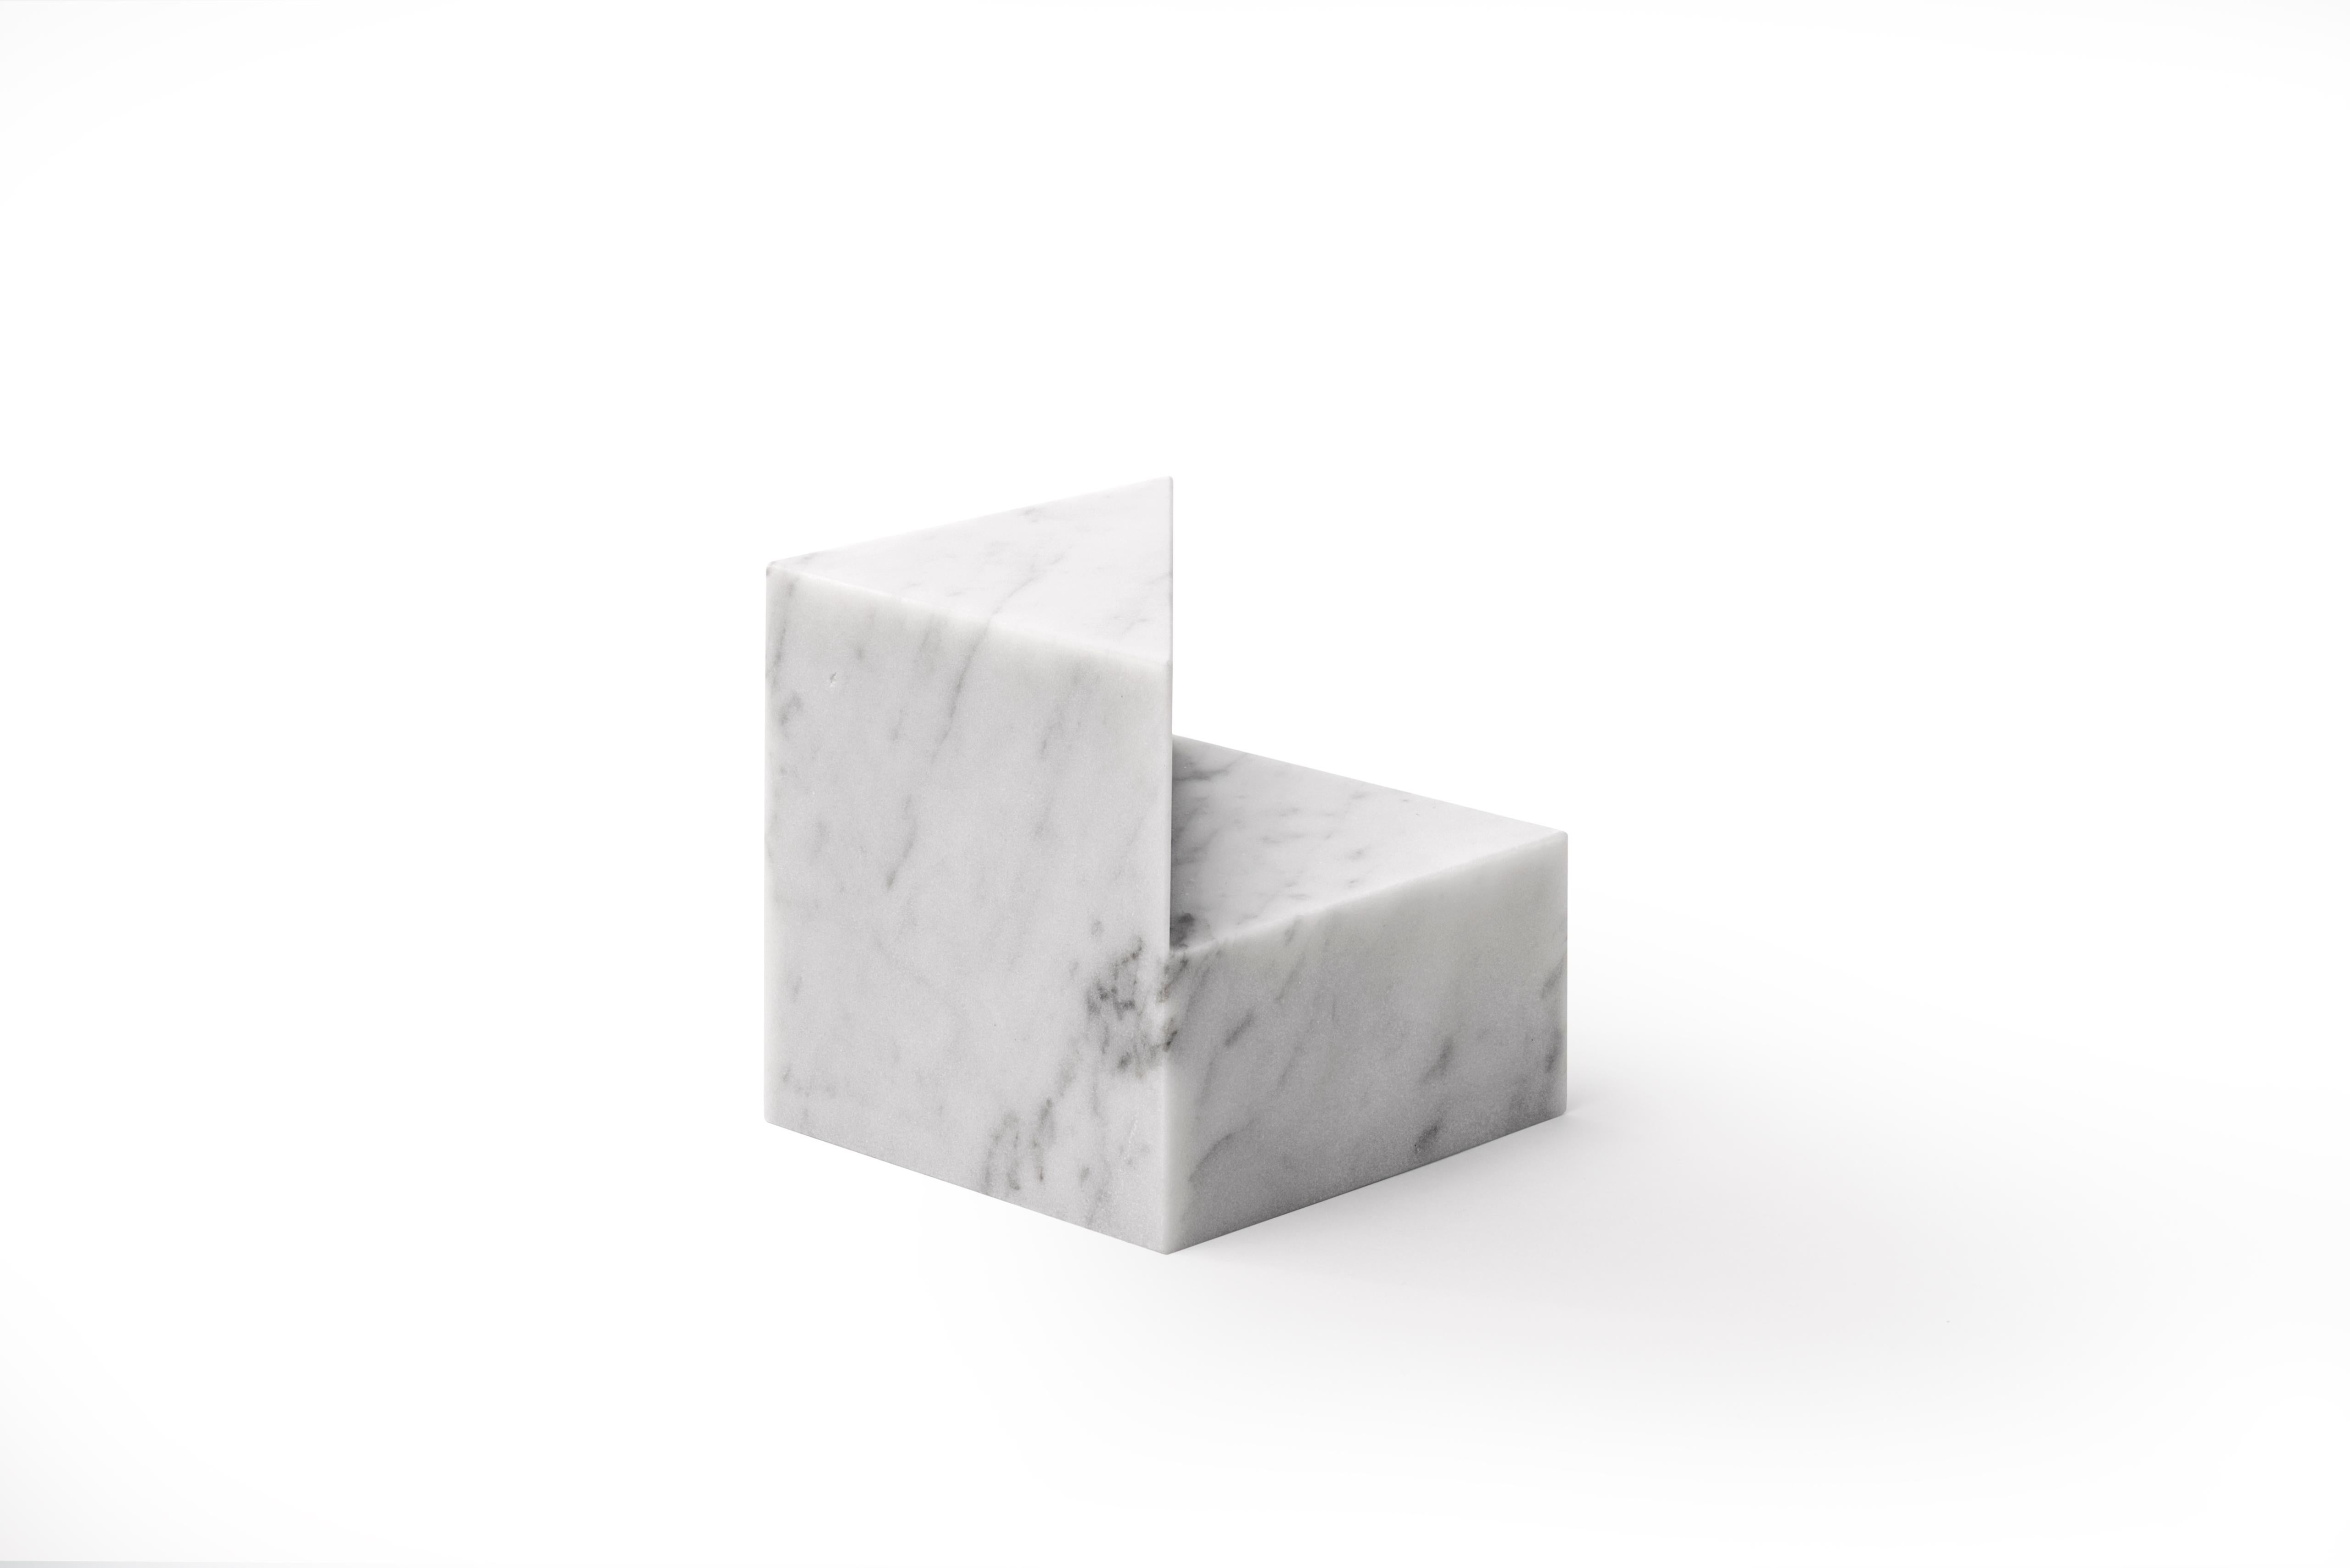 A collection of elegant paperweights in natural stone designed by Elisa Ossino for Salvatori. These pieces play with the simplicity of geometry in their cylindrical and cubed forms. Available in classic white Bianco Carrara and striking black Nero